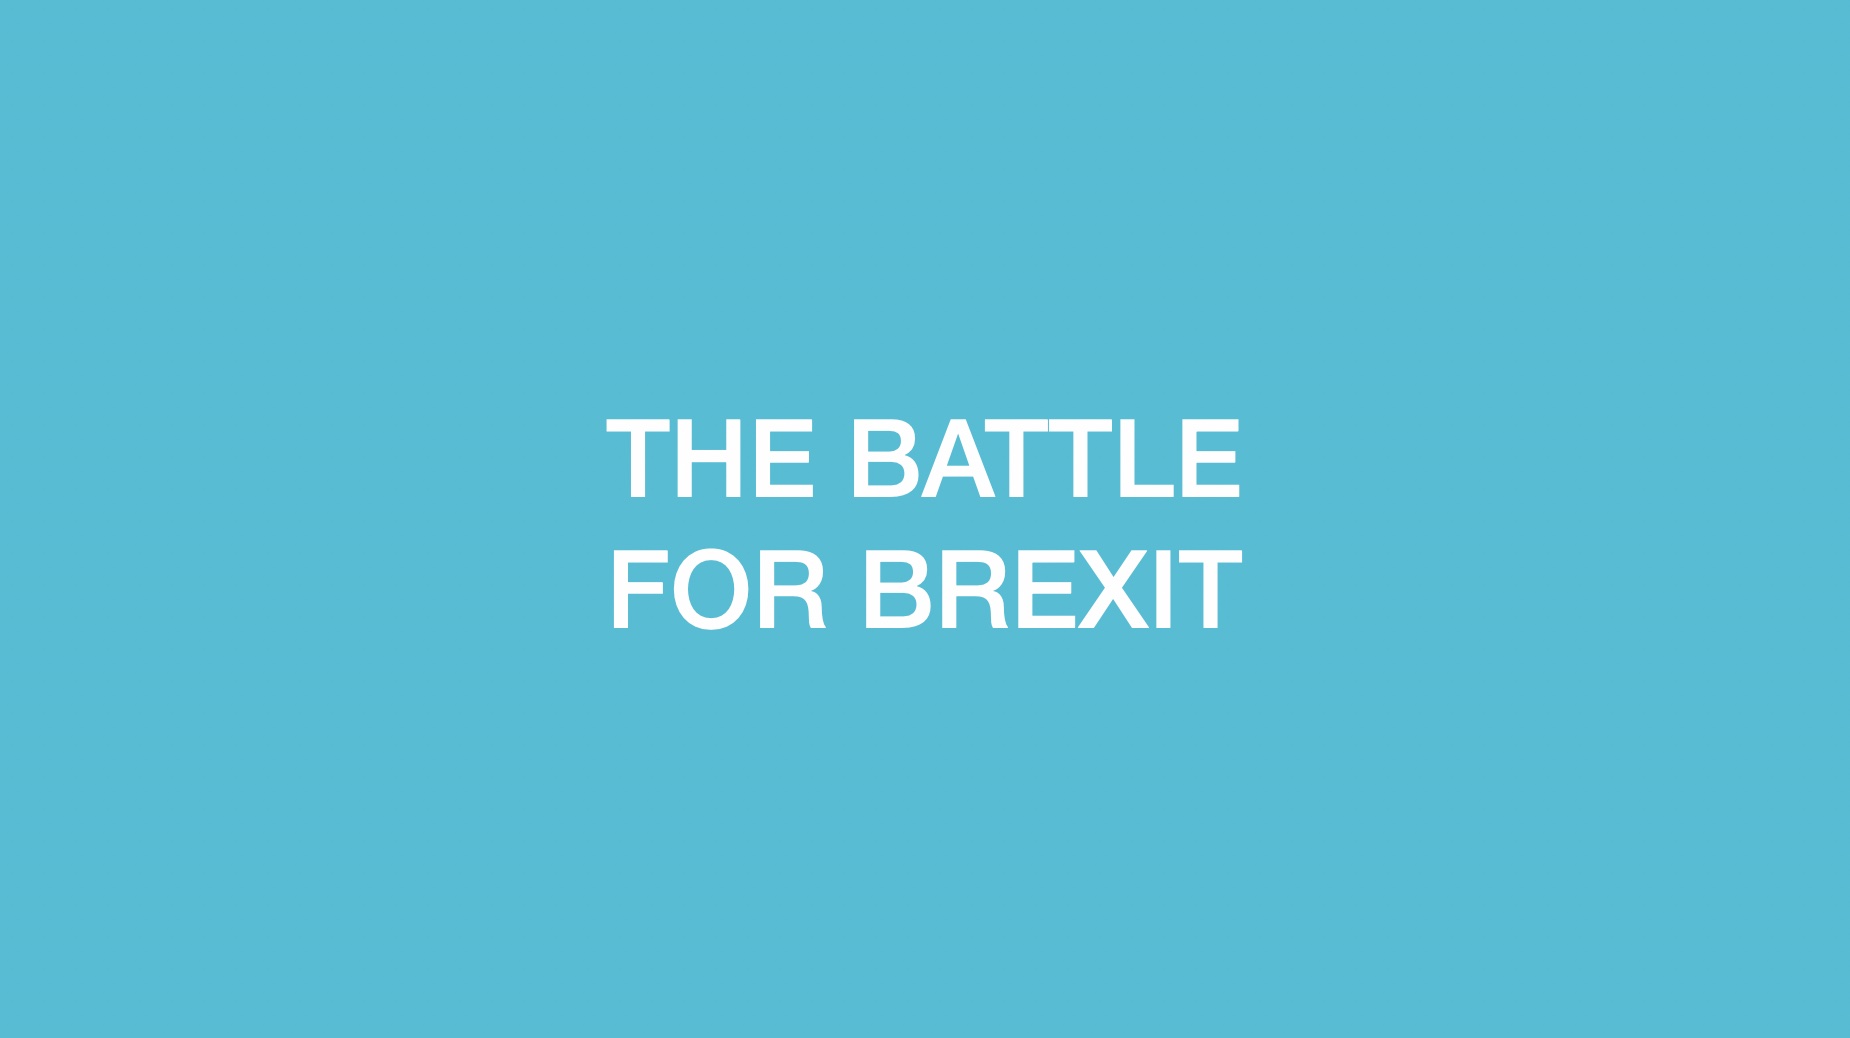 The Battle for Brexit image 1